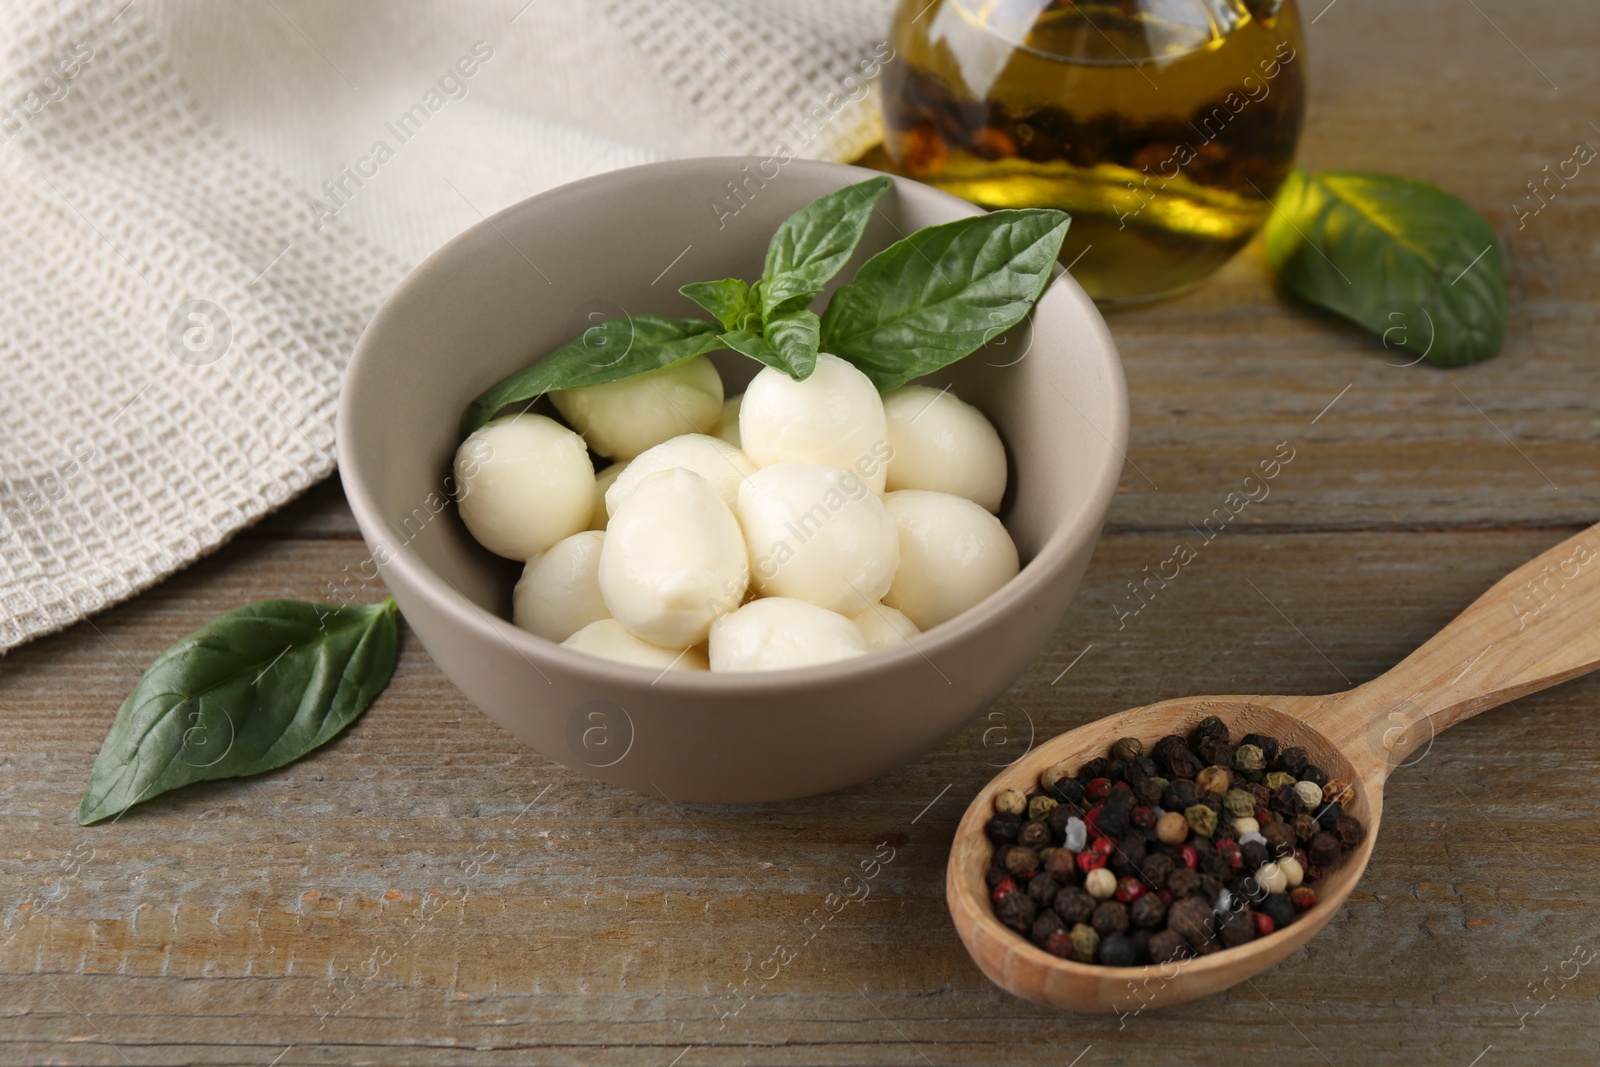 Photo of Tasty mozarella balls, basil leaves, oil and spices on wooden table